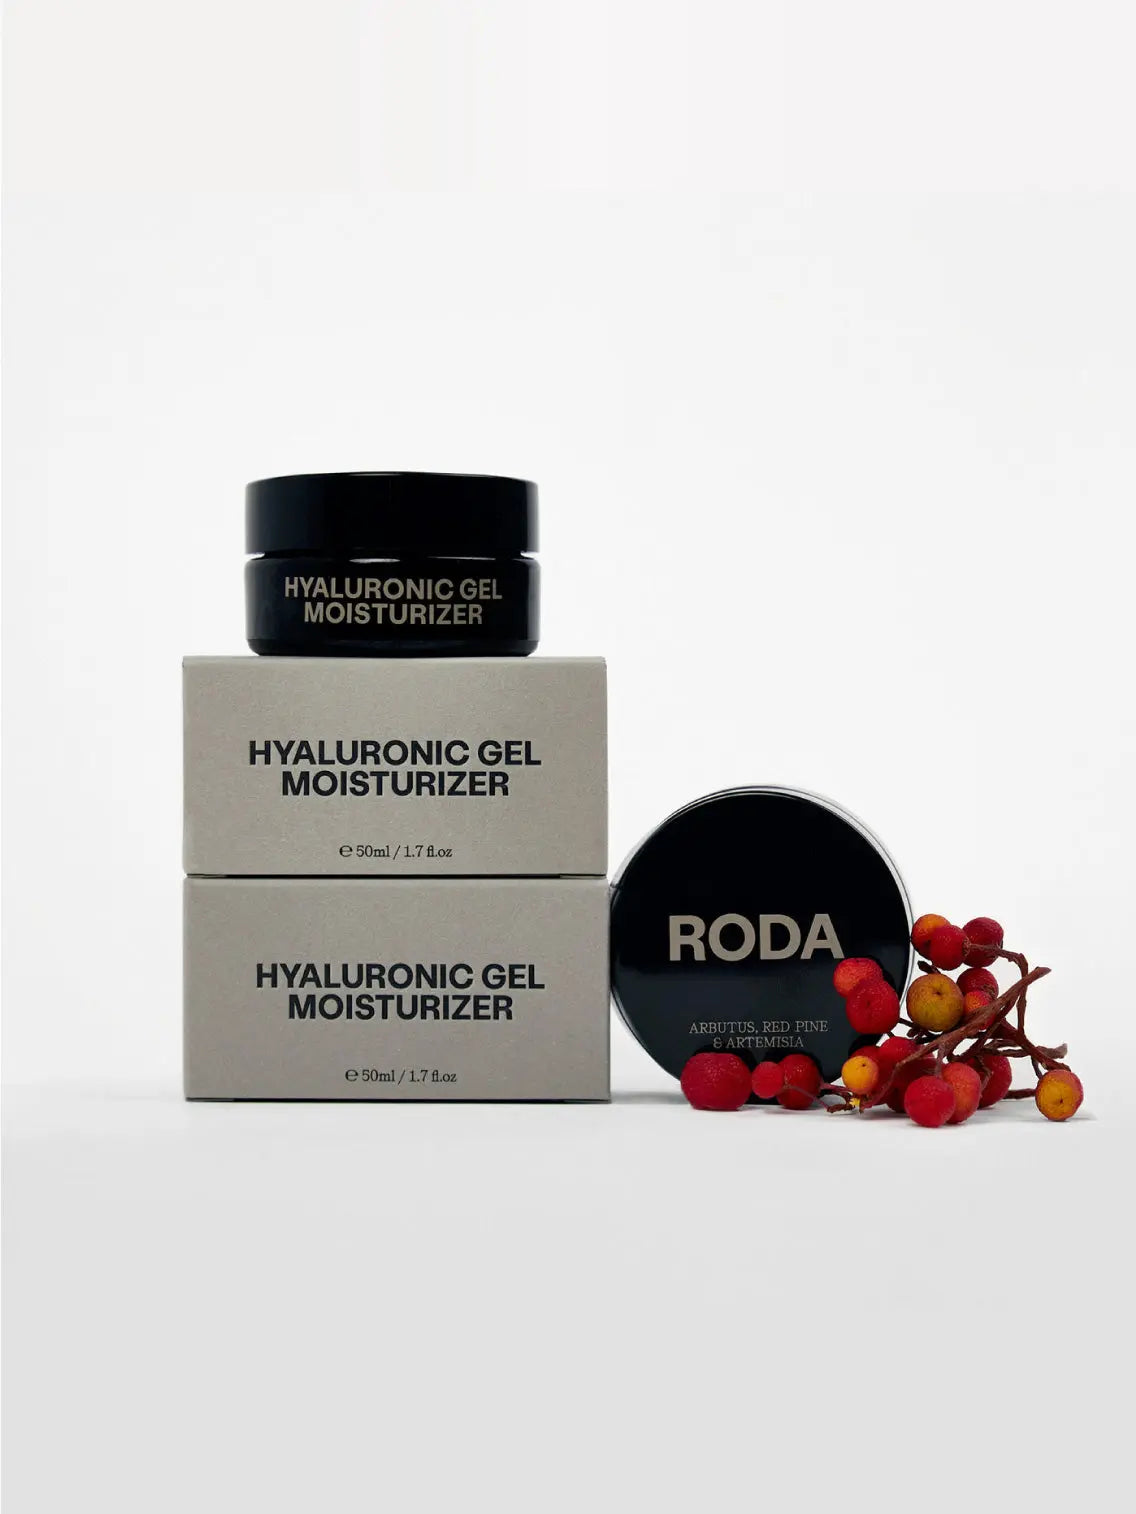 A beige box labeled "Roda Hyaluronic Gel Moisturizer," featuring "Arbutus, Red Pine & Artemisia" in smaller text, sits beside an open round black container with the same label. A small bunch of red berries lies to the right of the container, a signature offering at Bassal Store in Barcelona.